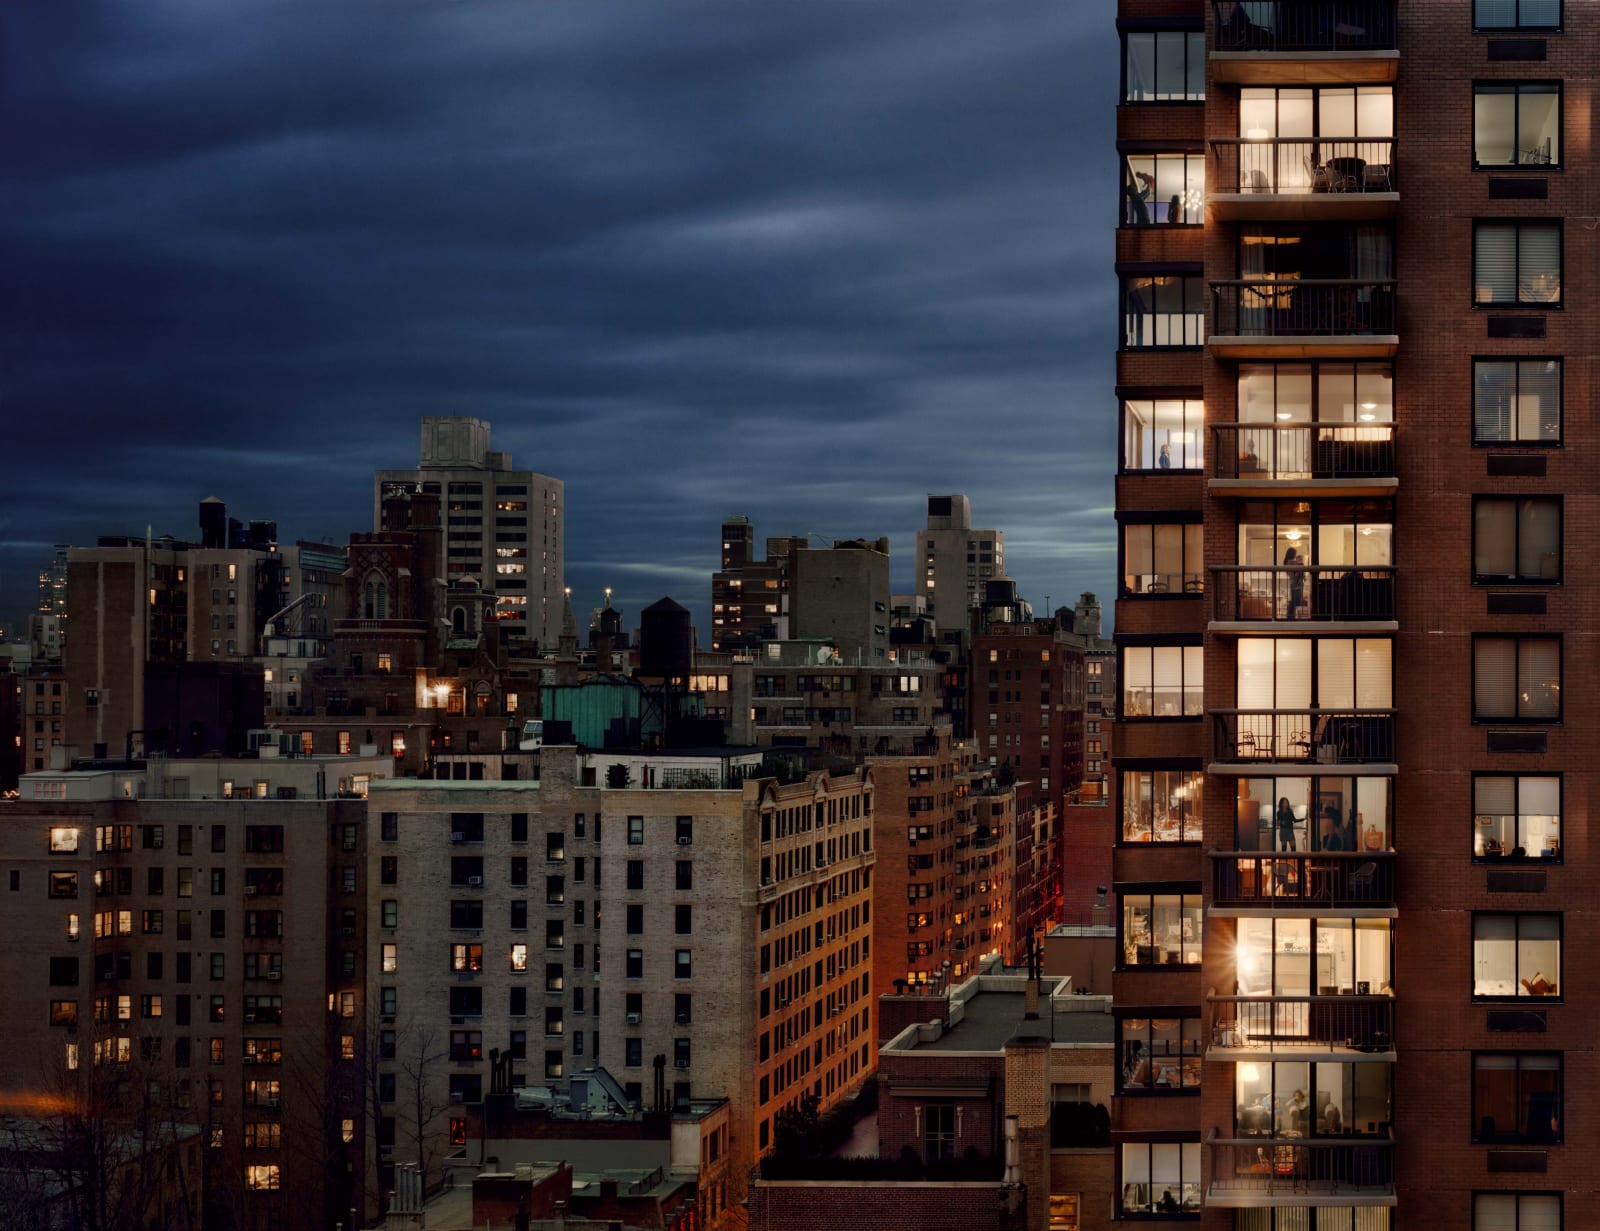 Gail Albert Halaban Out My Window New York Out My Window, Upper East Side, 1438 3rd Avenue, Families Just Before Dinner, 2008 highrise building at night with lit windows dark sky city skyline